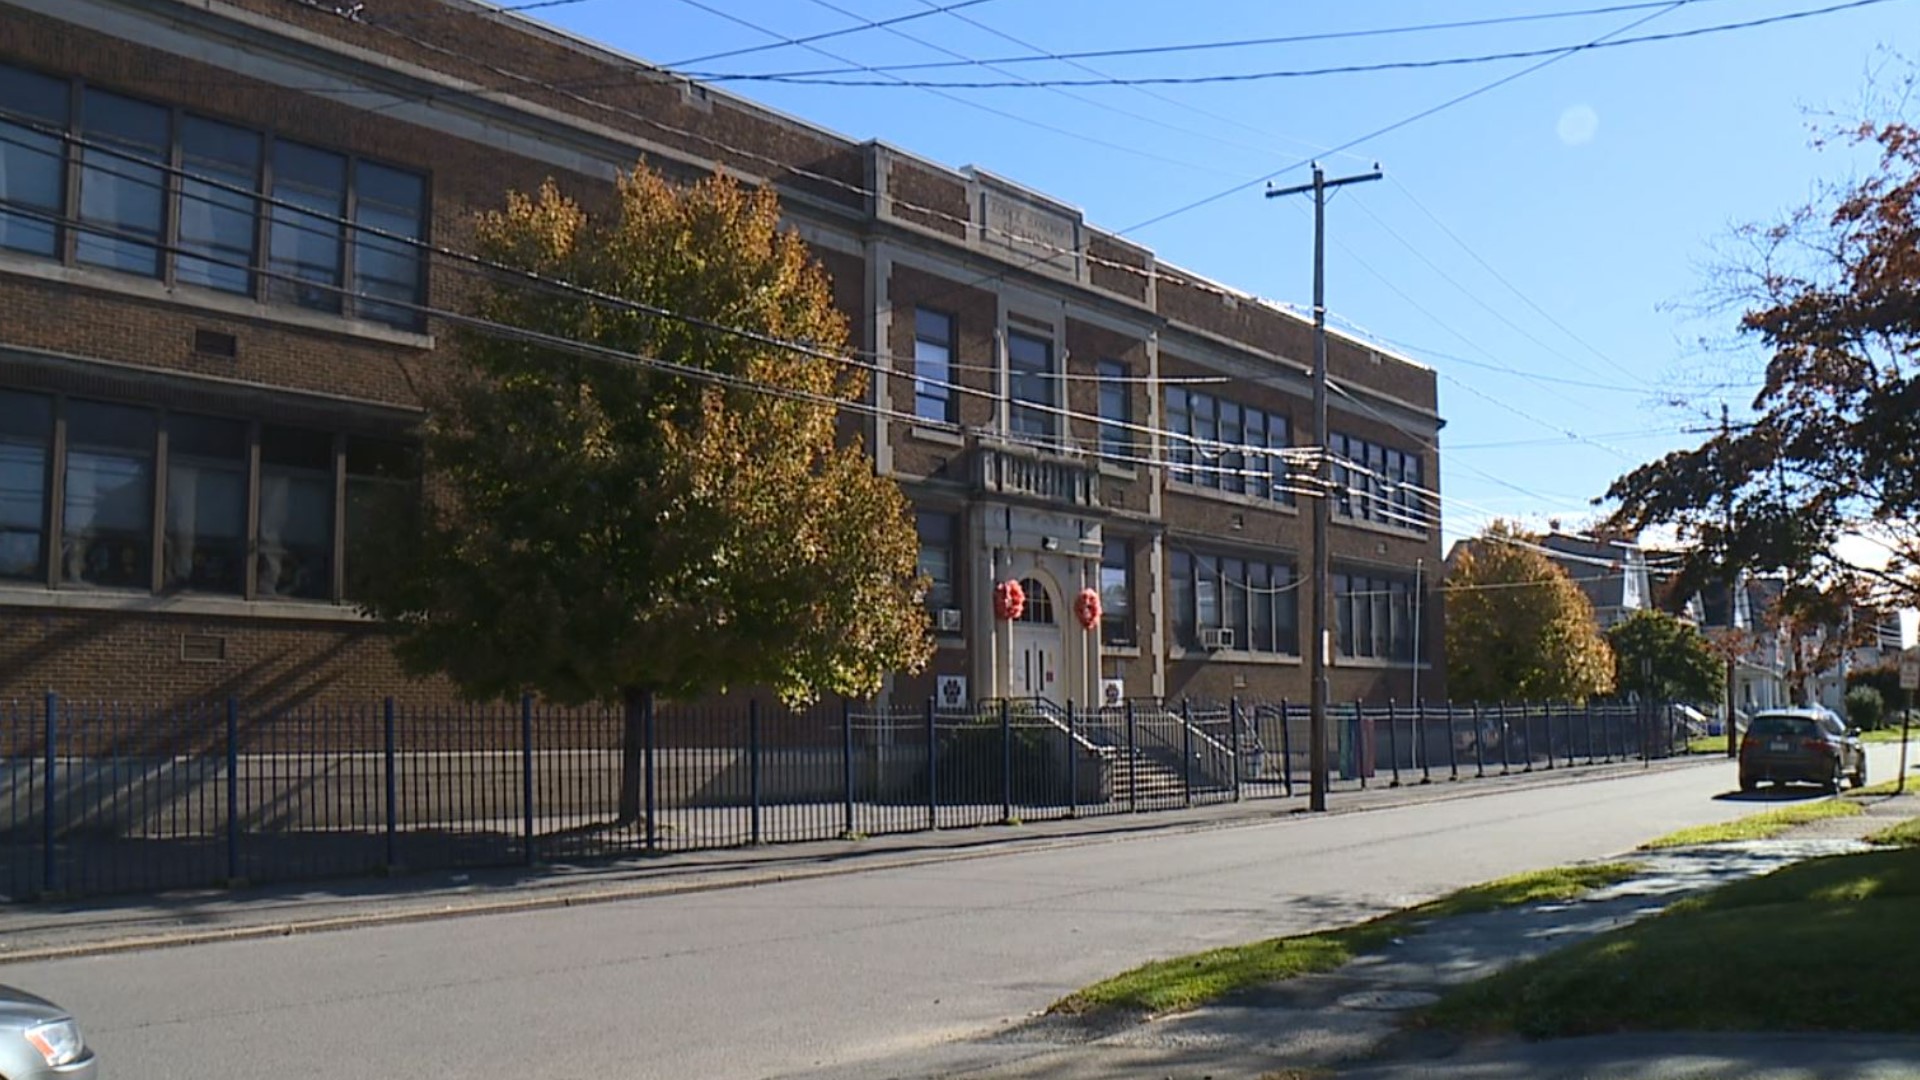 The Scranton School District needs to climb out of the financial hole. Part of the solution could mean closing one of its elementary schools.